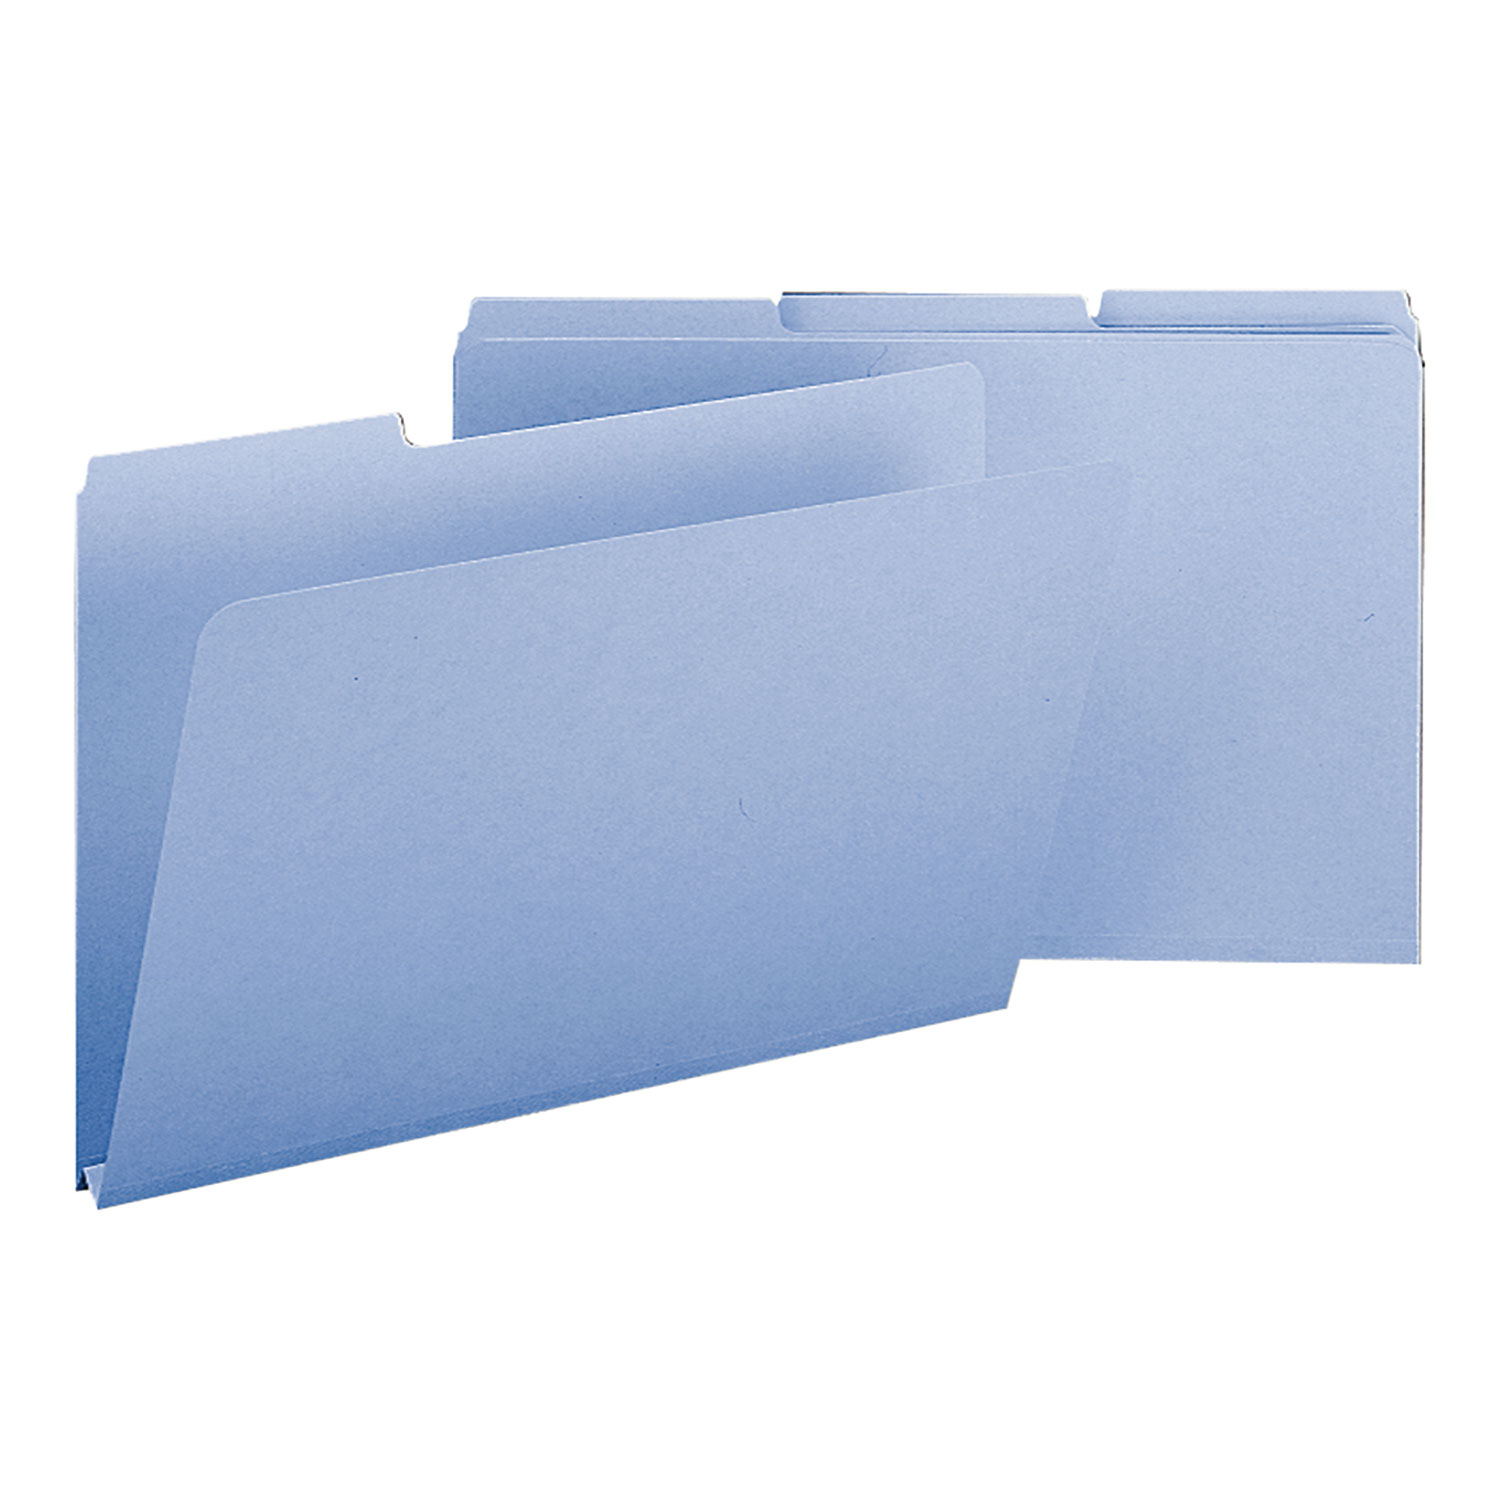  Smead 22530 Expanding Recycled Heavy Pressboard Folders, 1/3-Cut Tabs, 1 Expansion, Legal Size, Blue, 25/Box (SMD22530) 